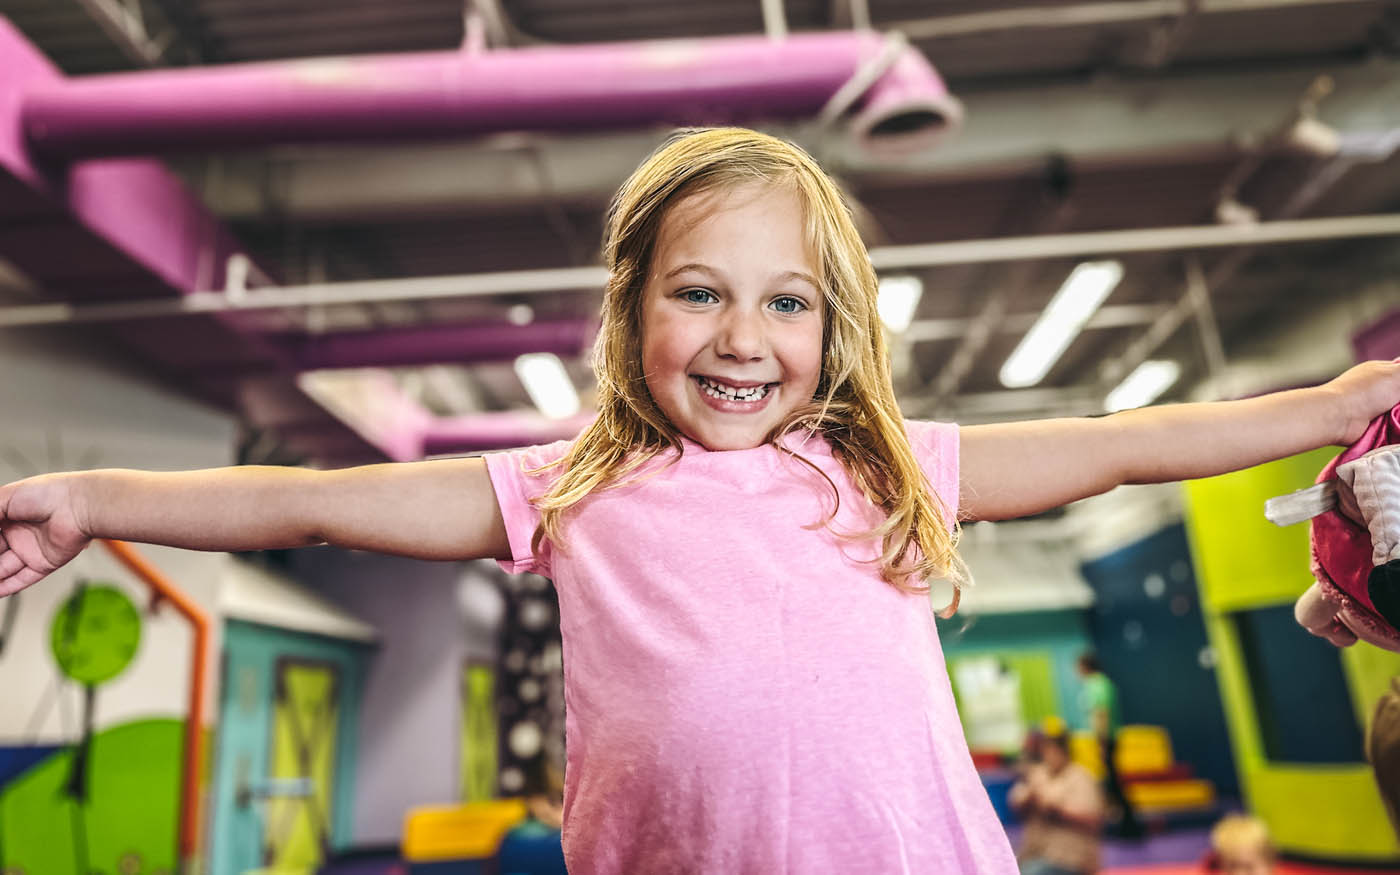 An about 5 year old girl playing in Romp n' Roll North Raleigh's gym.